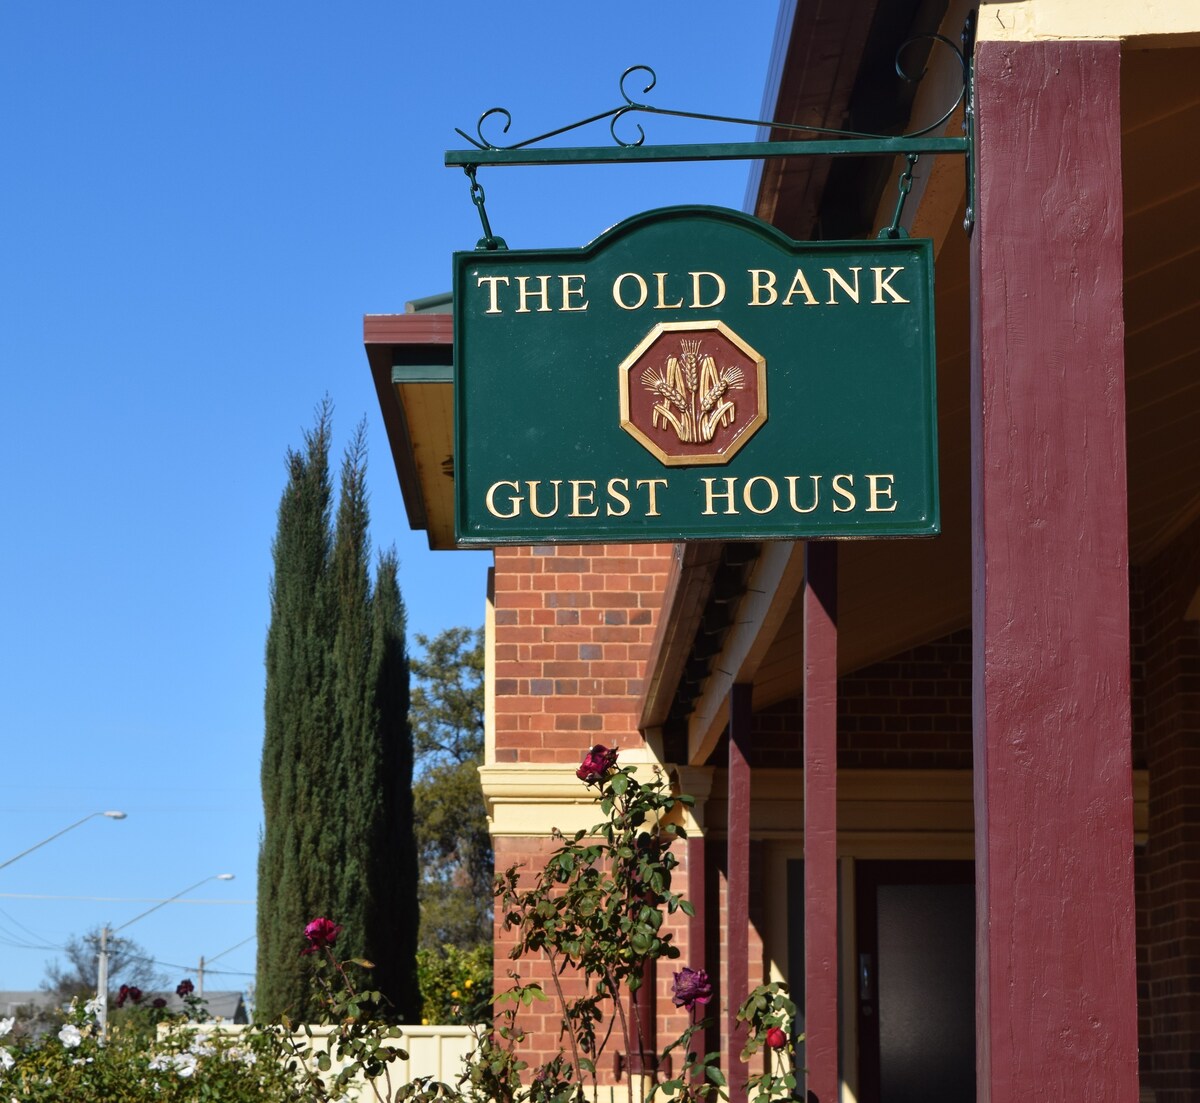 The Old Bank Guesthouse